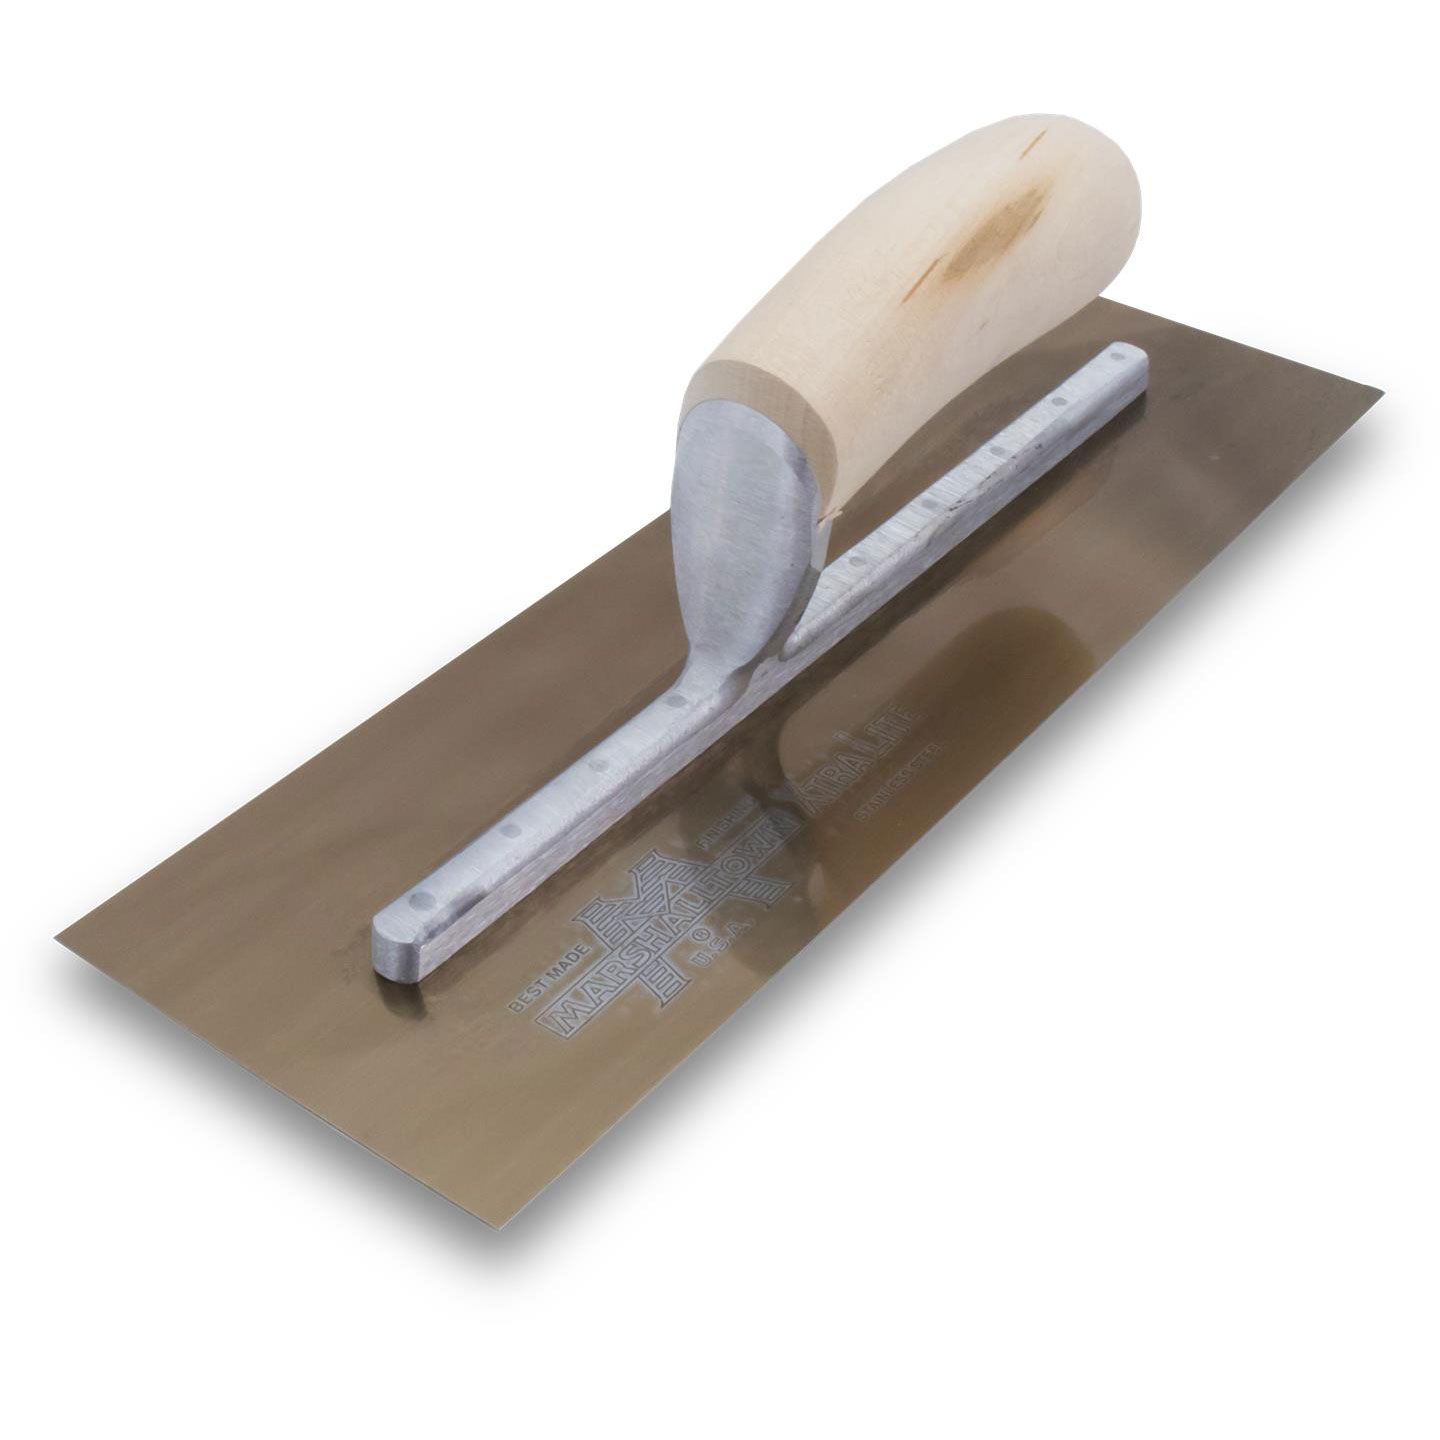 Marshalltown MXS62GS 12in x 4 GS Finishing Trowel Curved Wood Handle MAT-MXS62GS